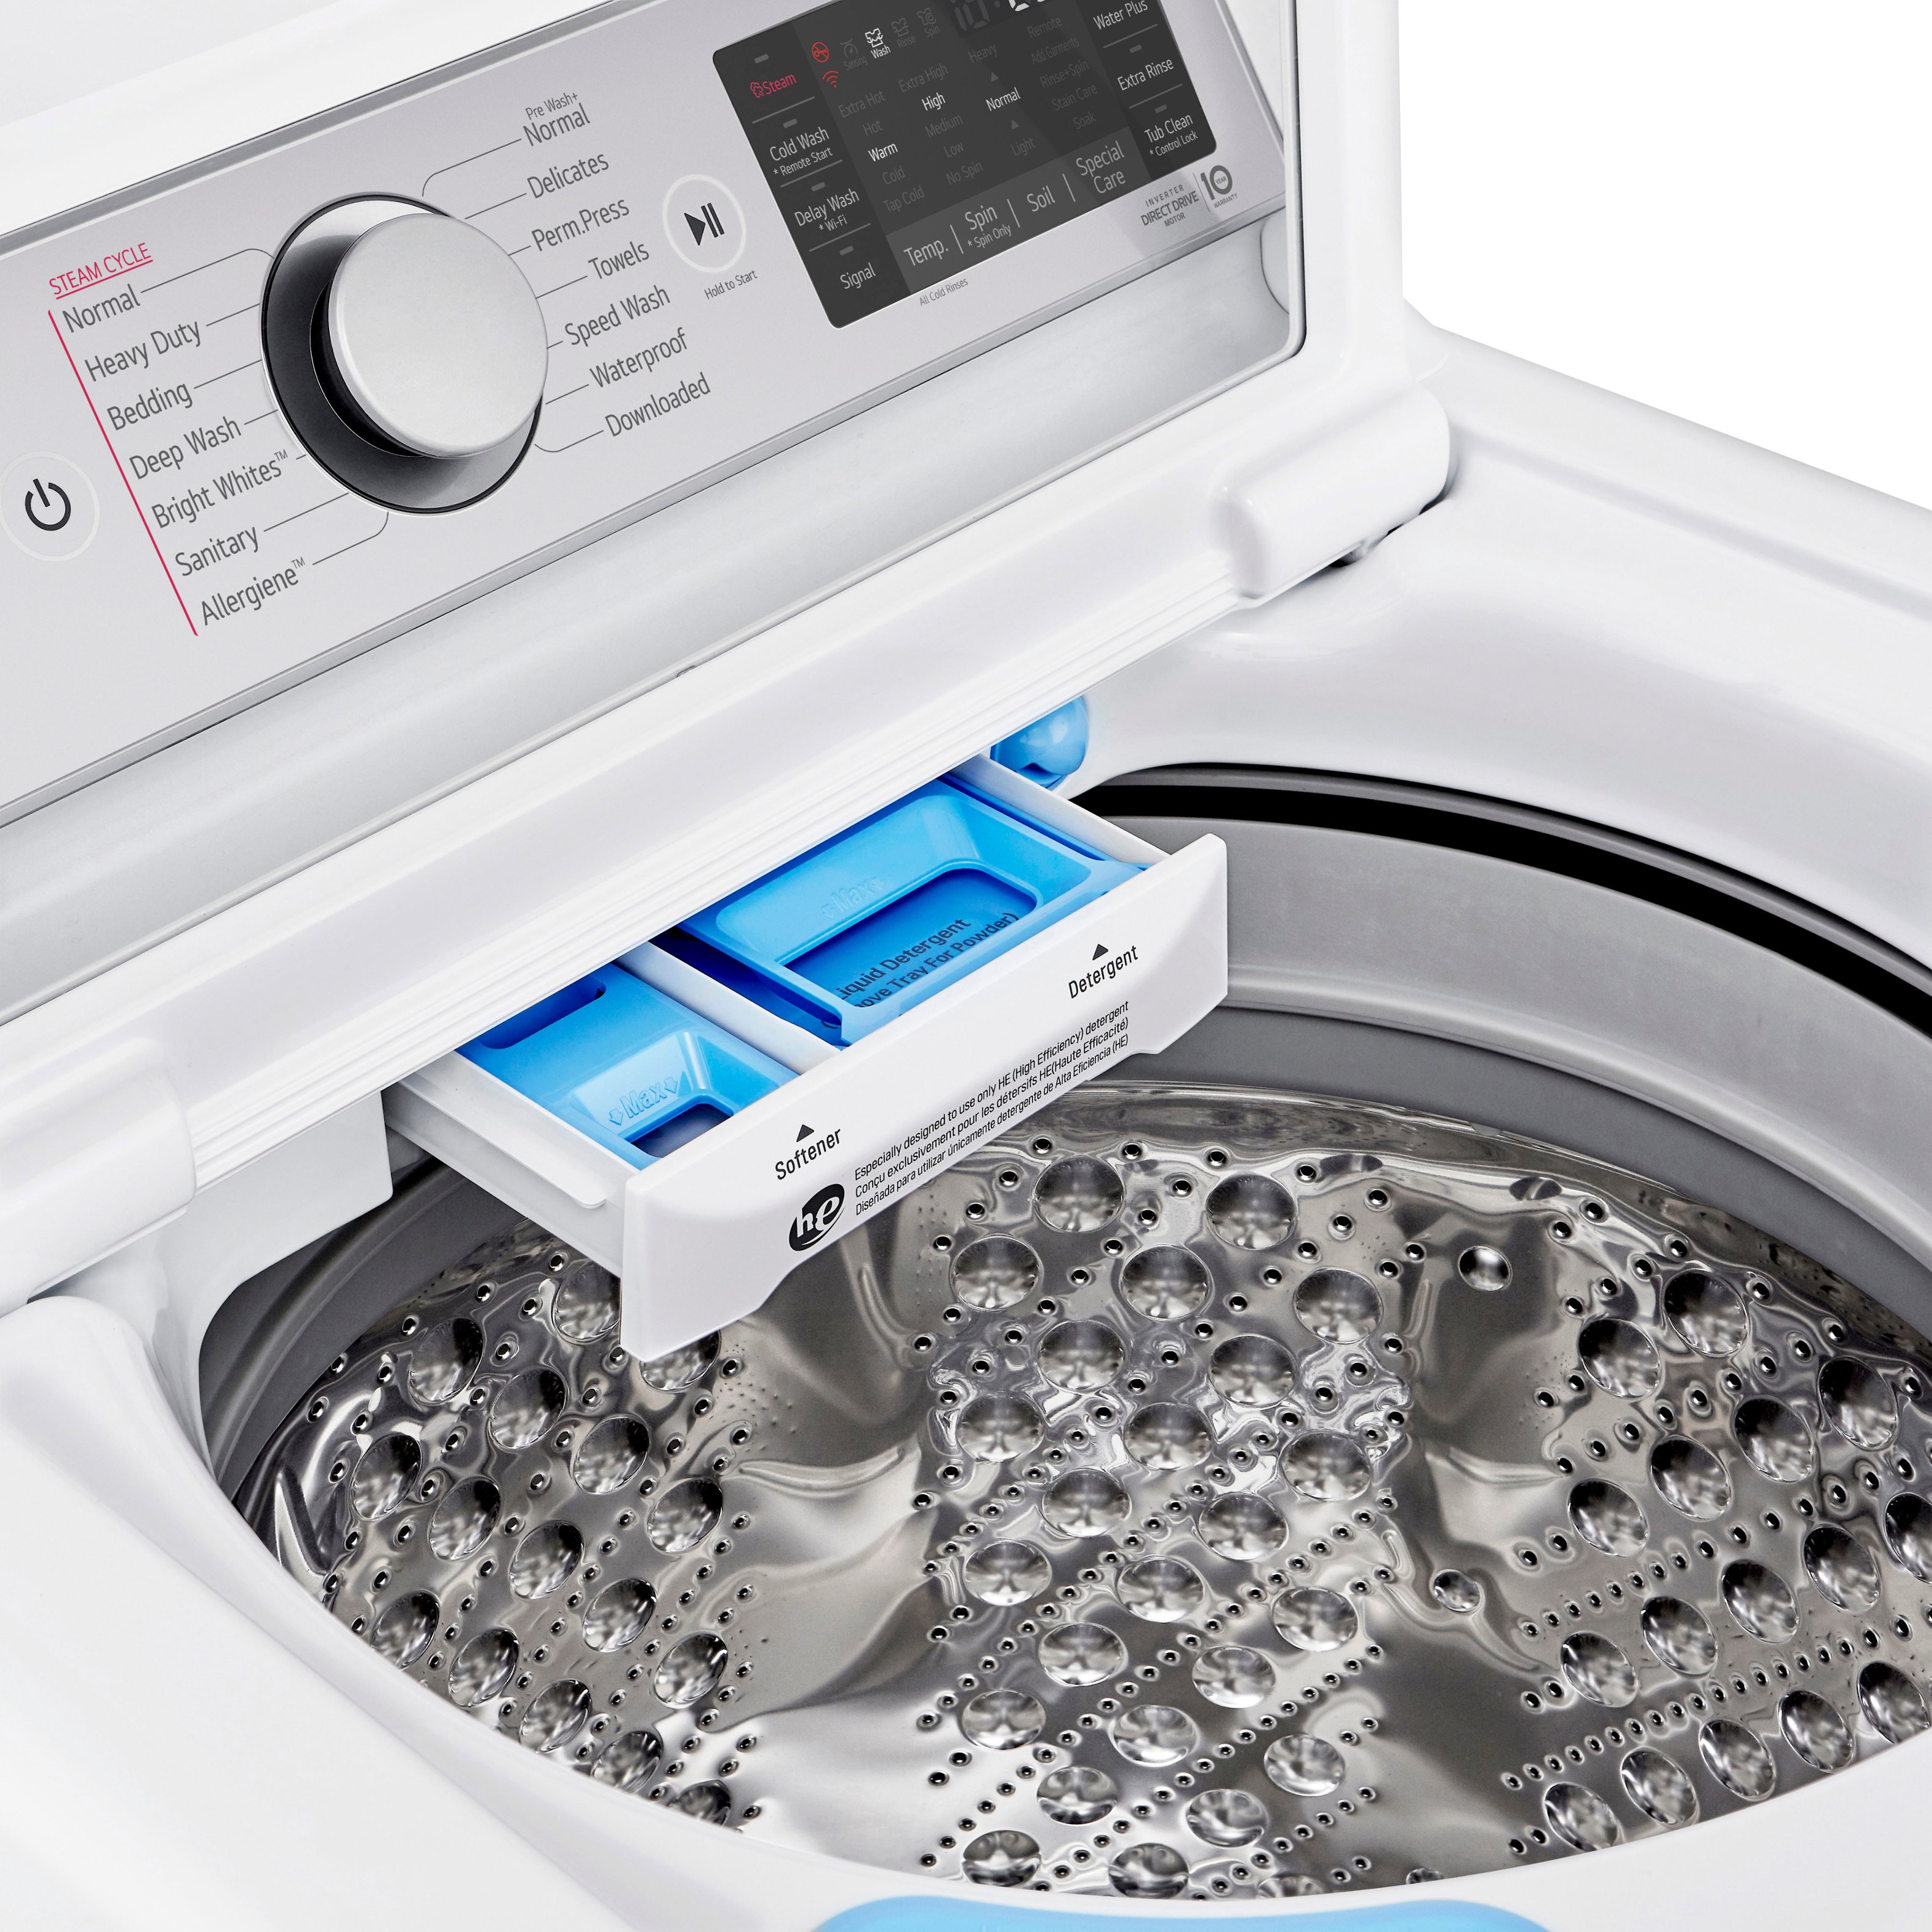 LG 5.5 Cu. Ft. High-Efficiency Smart Top Load Washer with